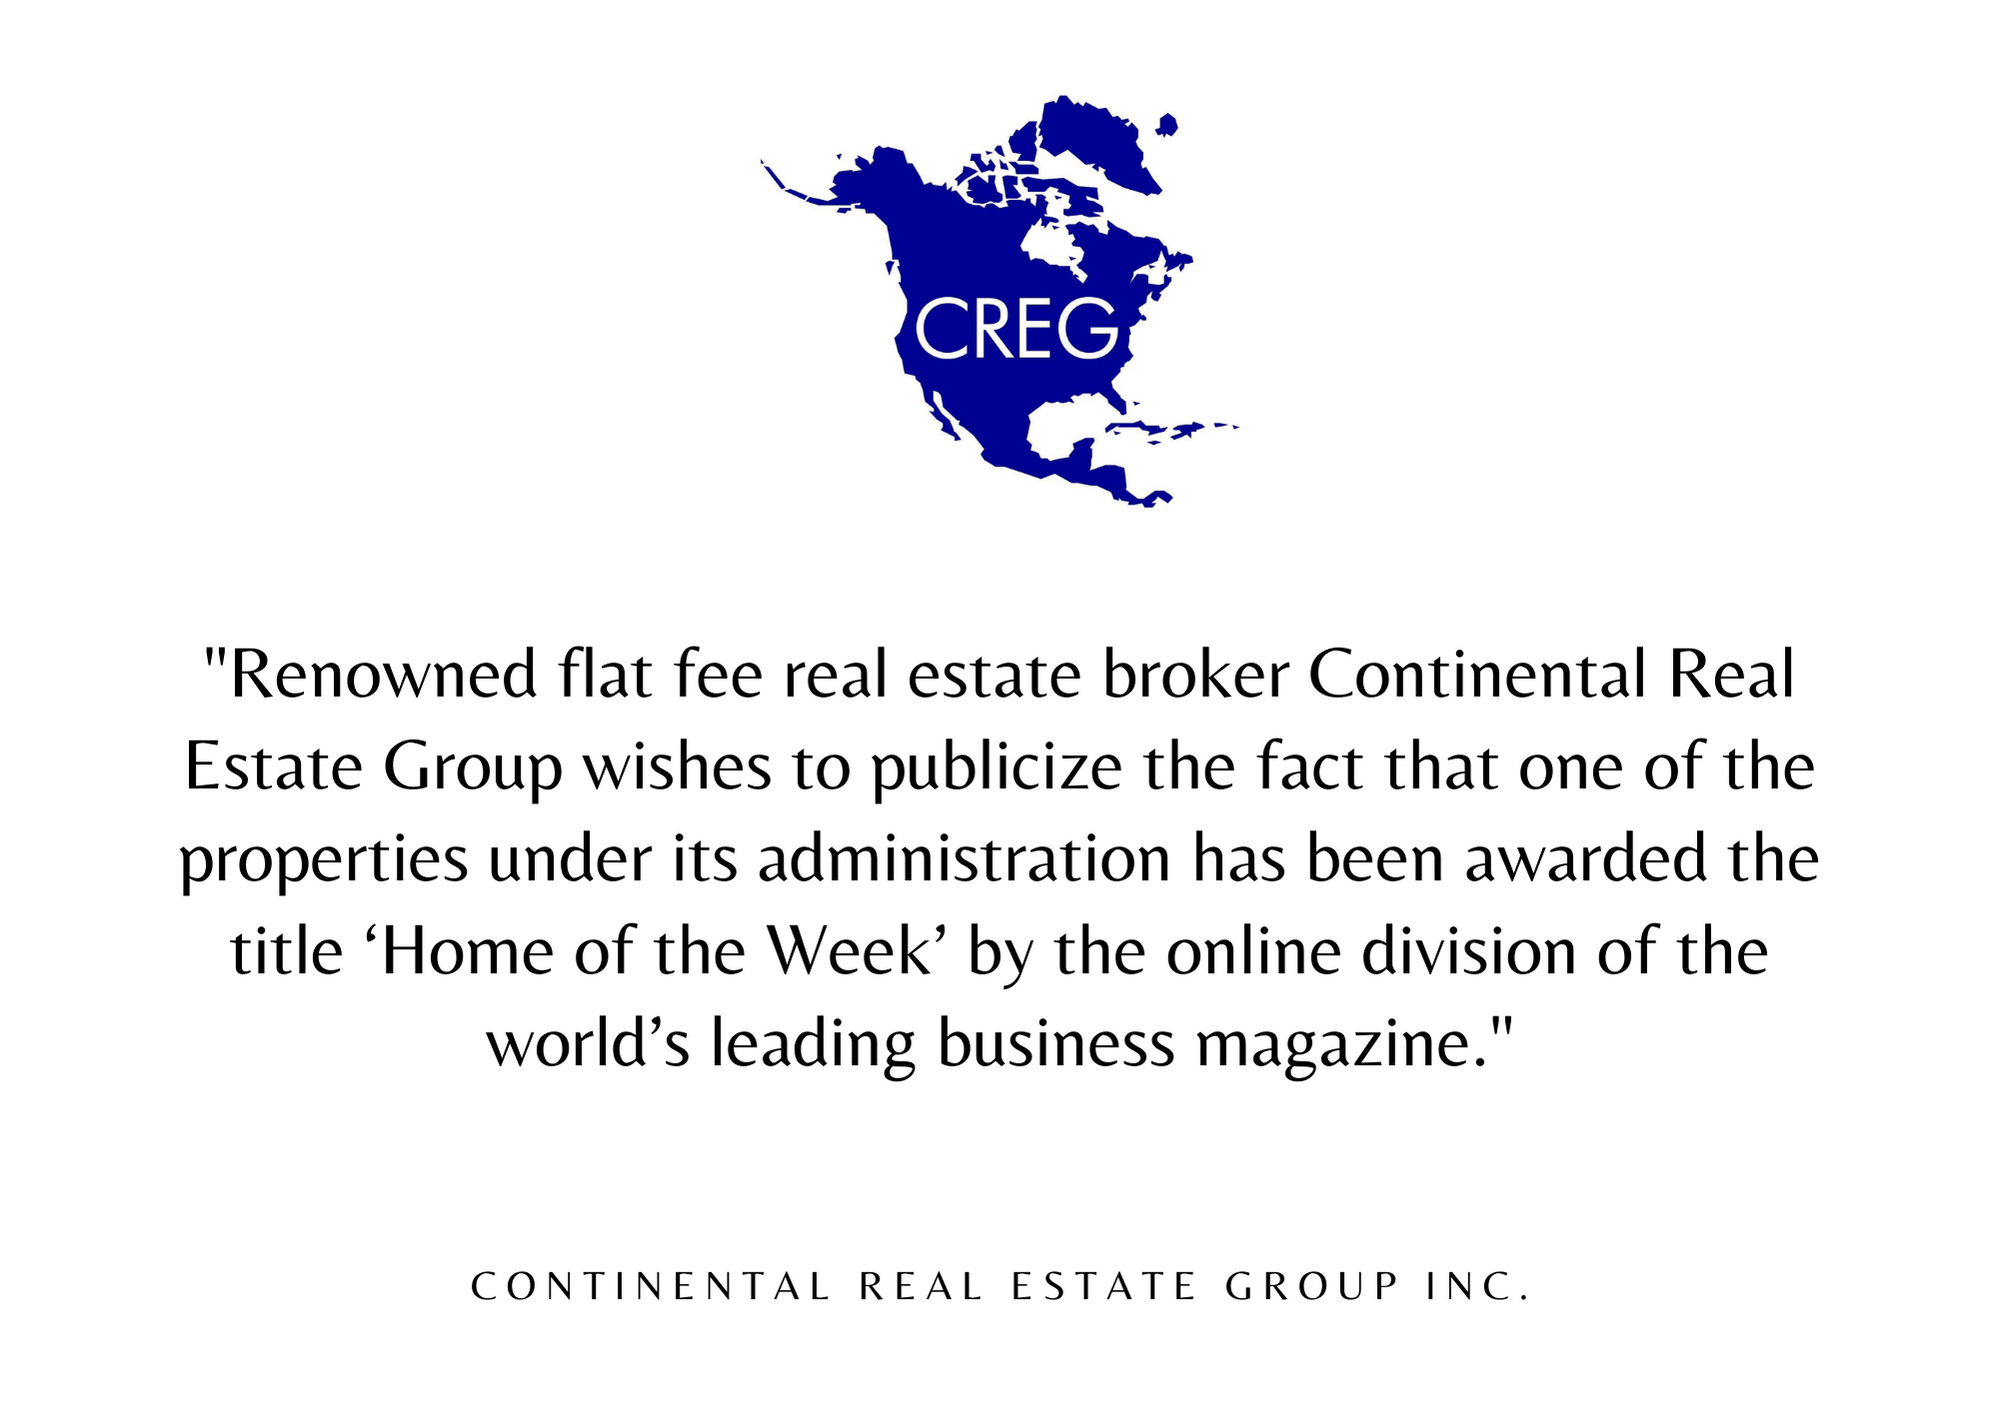 Continental Real Estate Group Inc., Friday, April 8, 2022, Press release picture